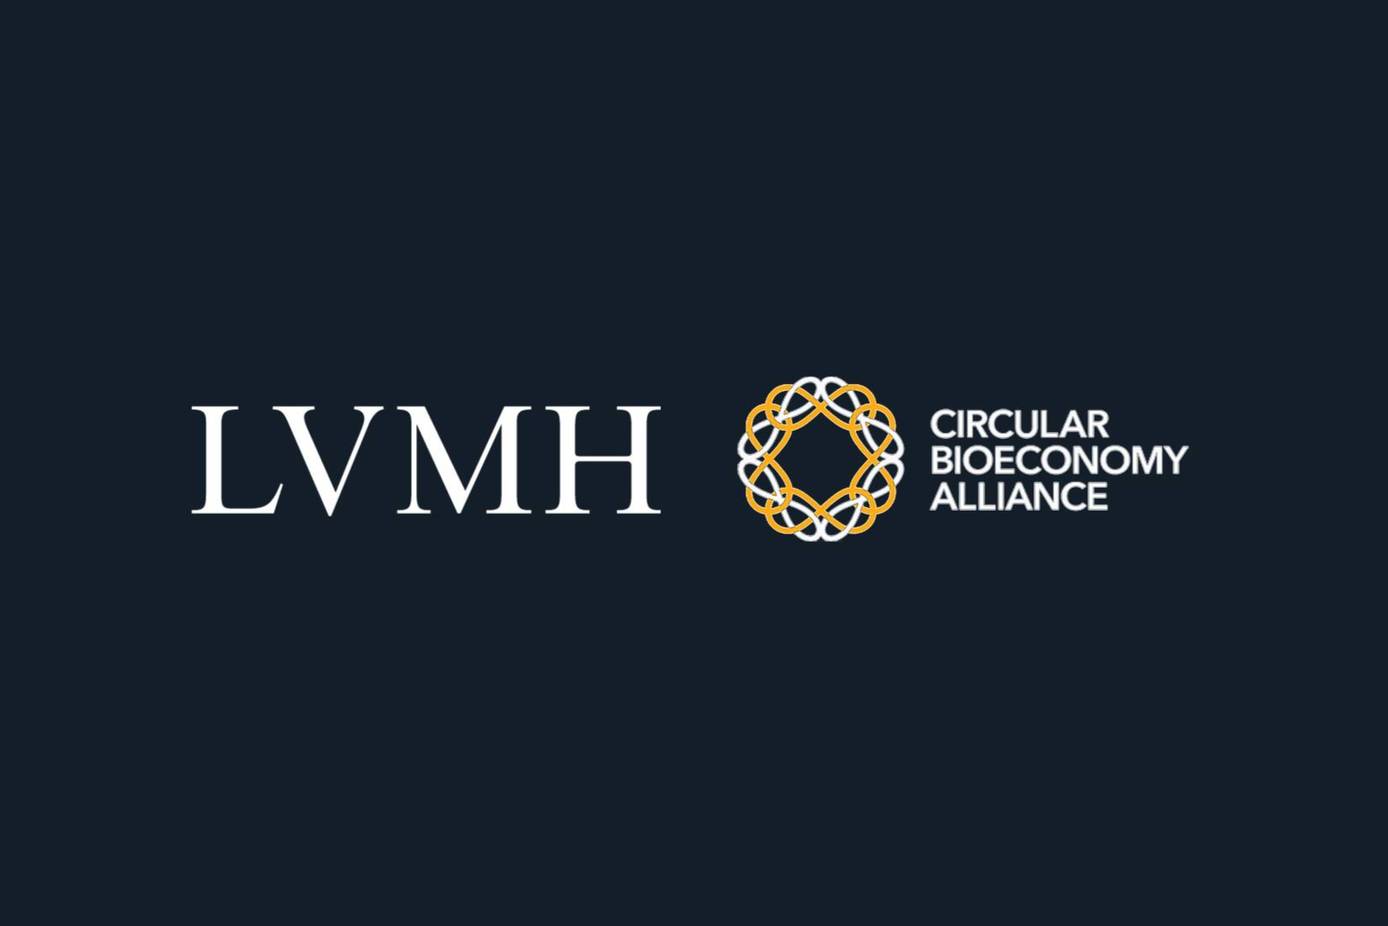 LVMH partners with Circular Bioeconomy Alliance to drive